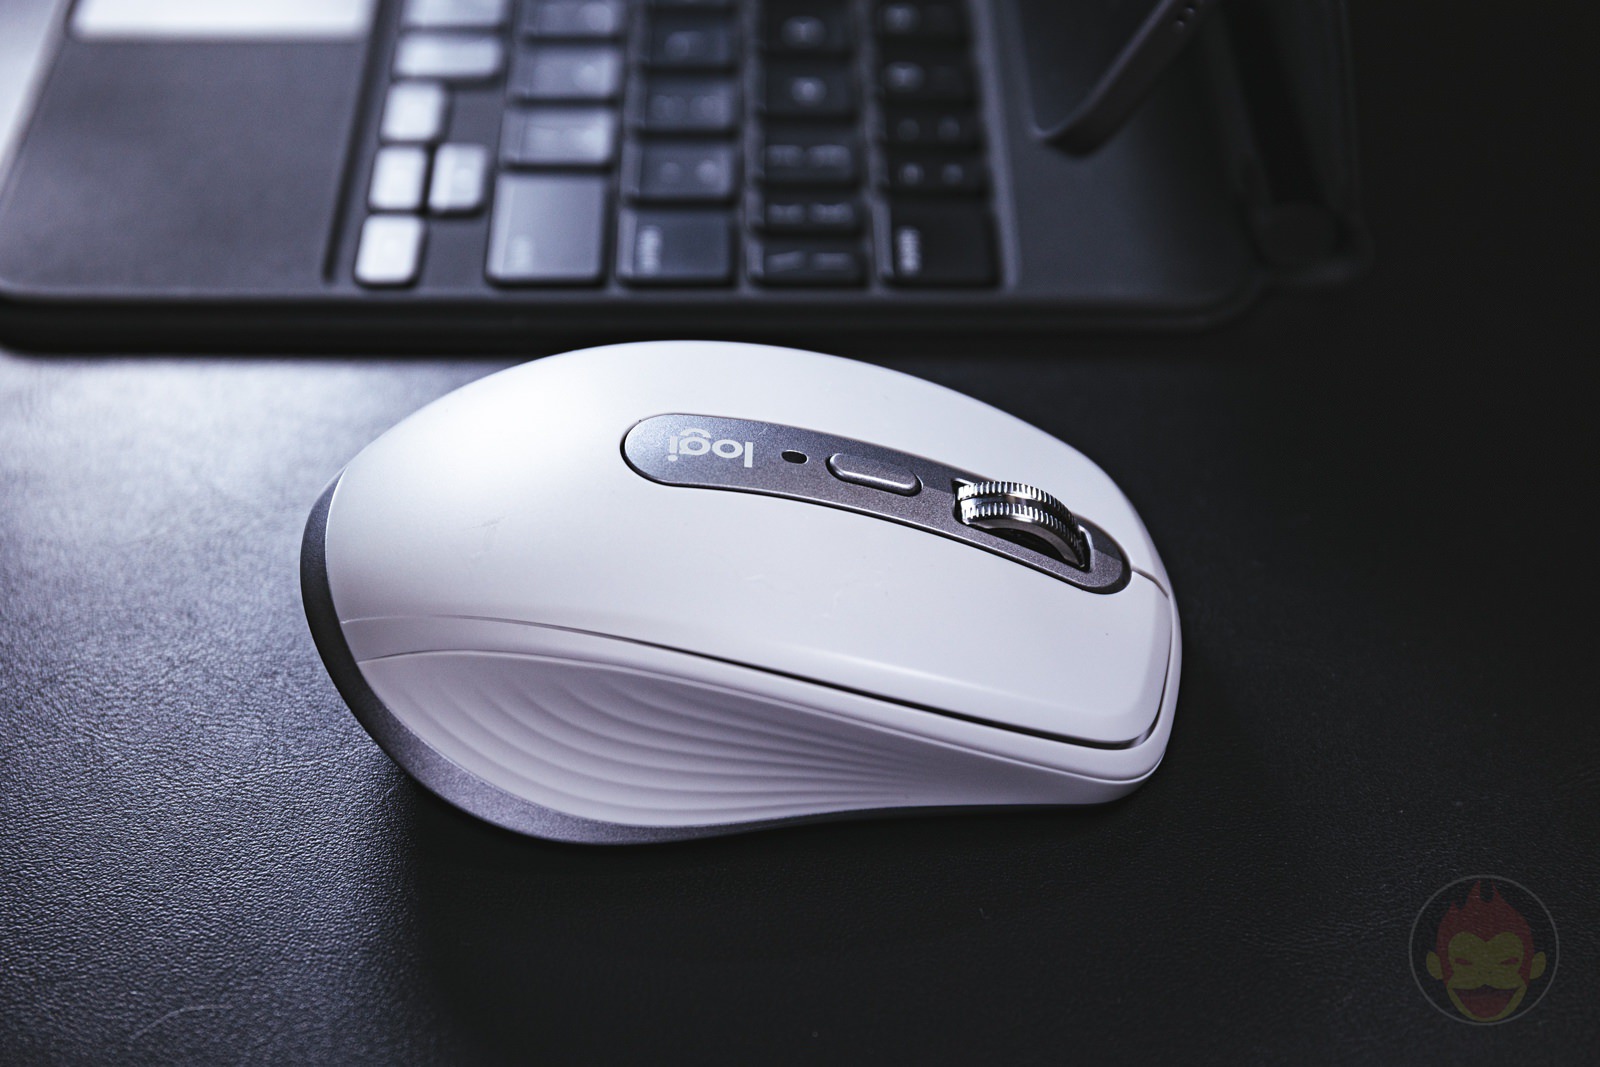 Logicool-MX-Anywhere-3-Mouse-Review-11.jpg